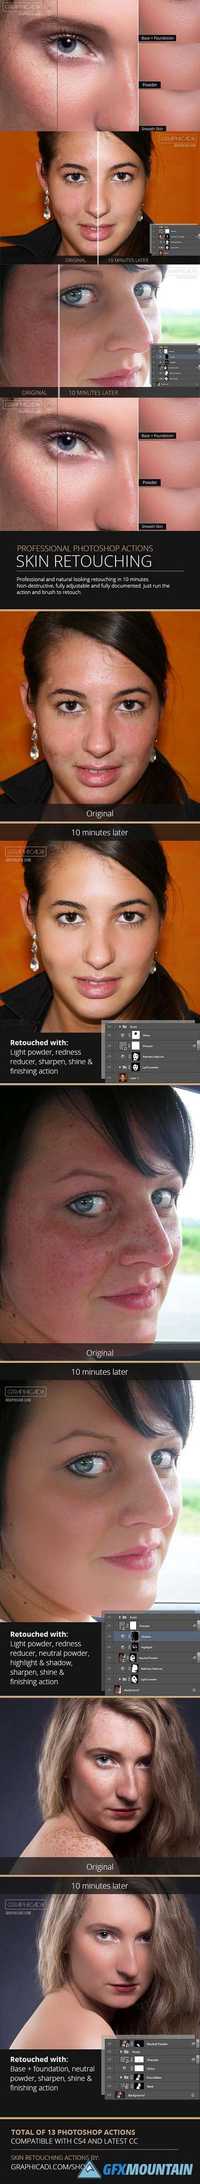  Skin Retouch Photoshop Actions  895881 